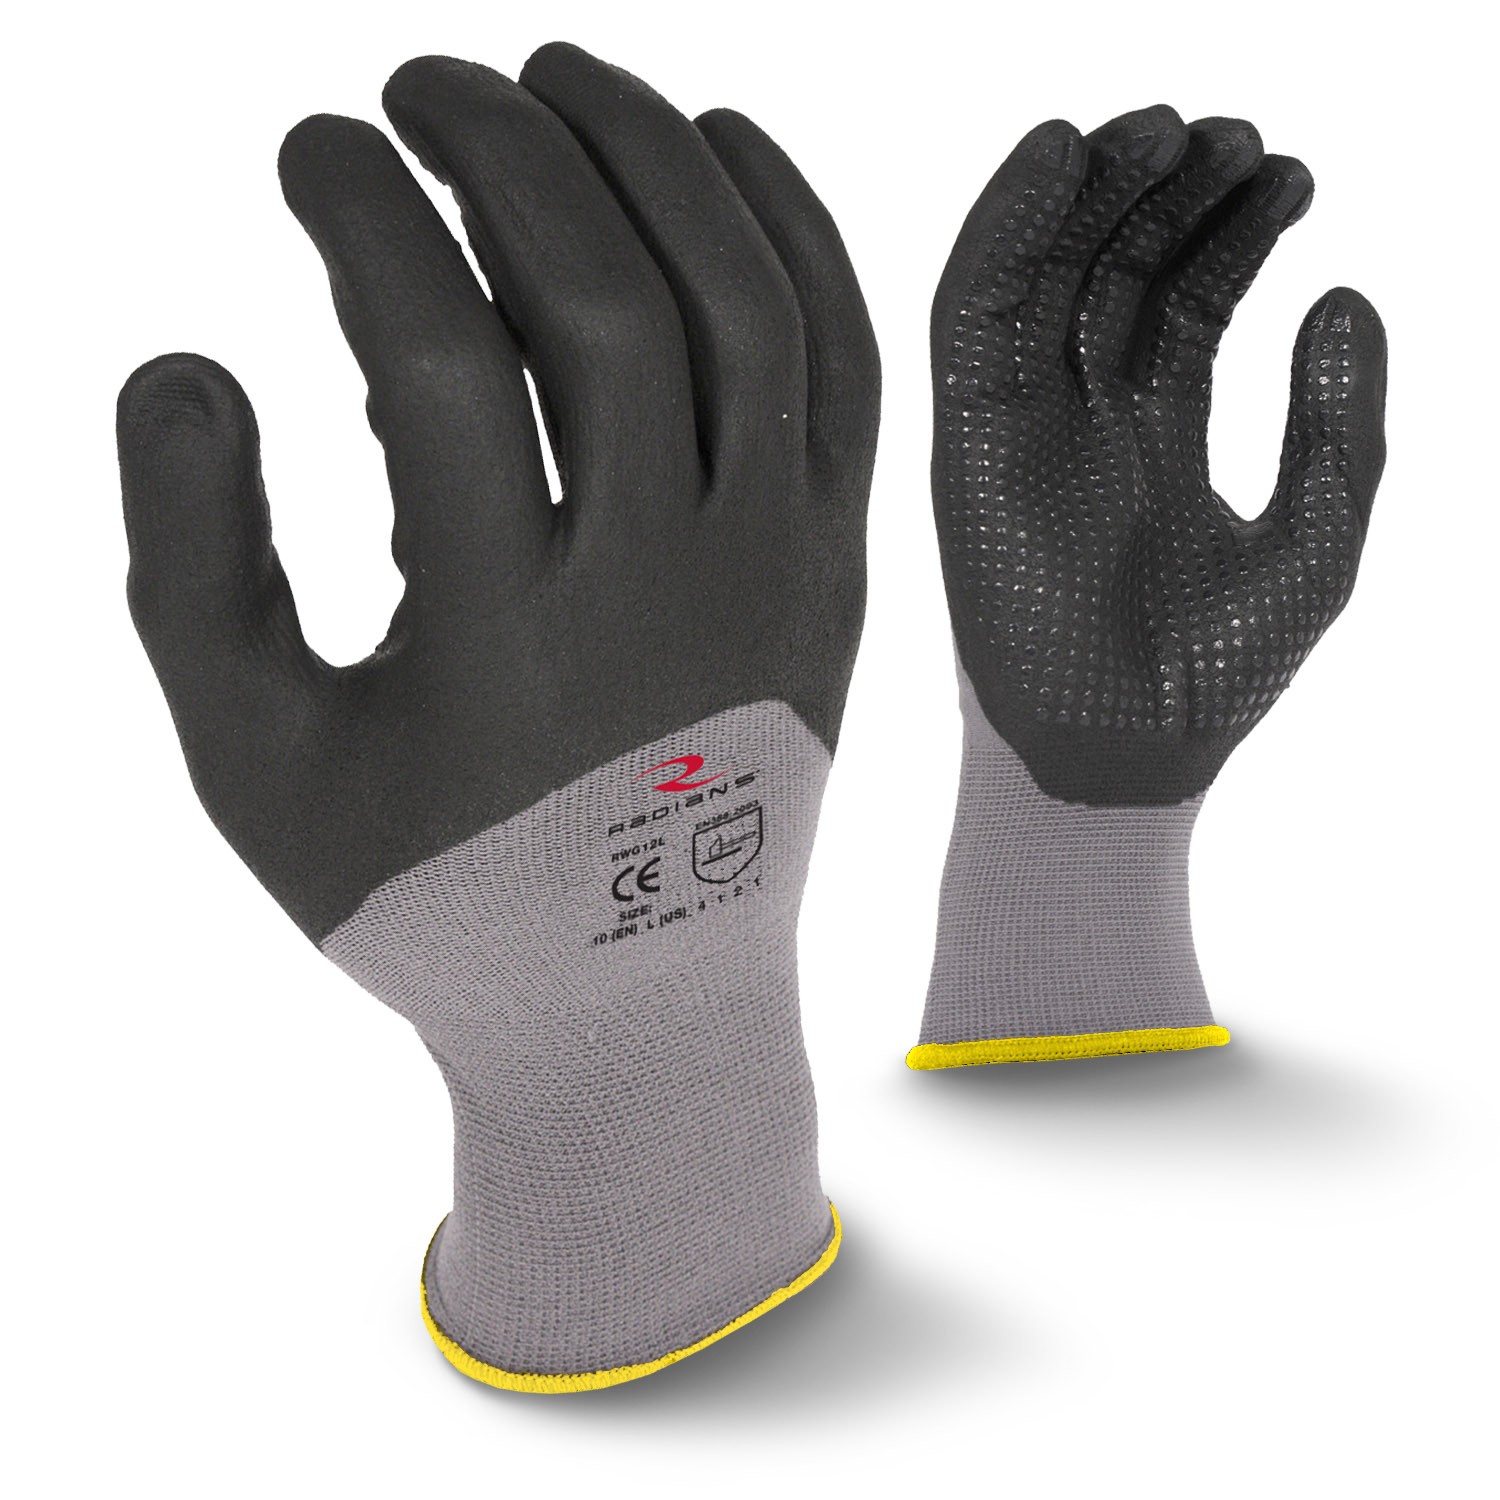 Radians 3/4 Foam Dipped Dotted Nitrile Glove (#RWG12)